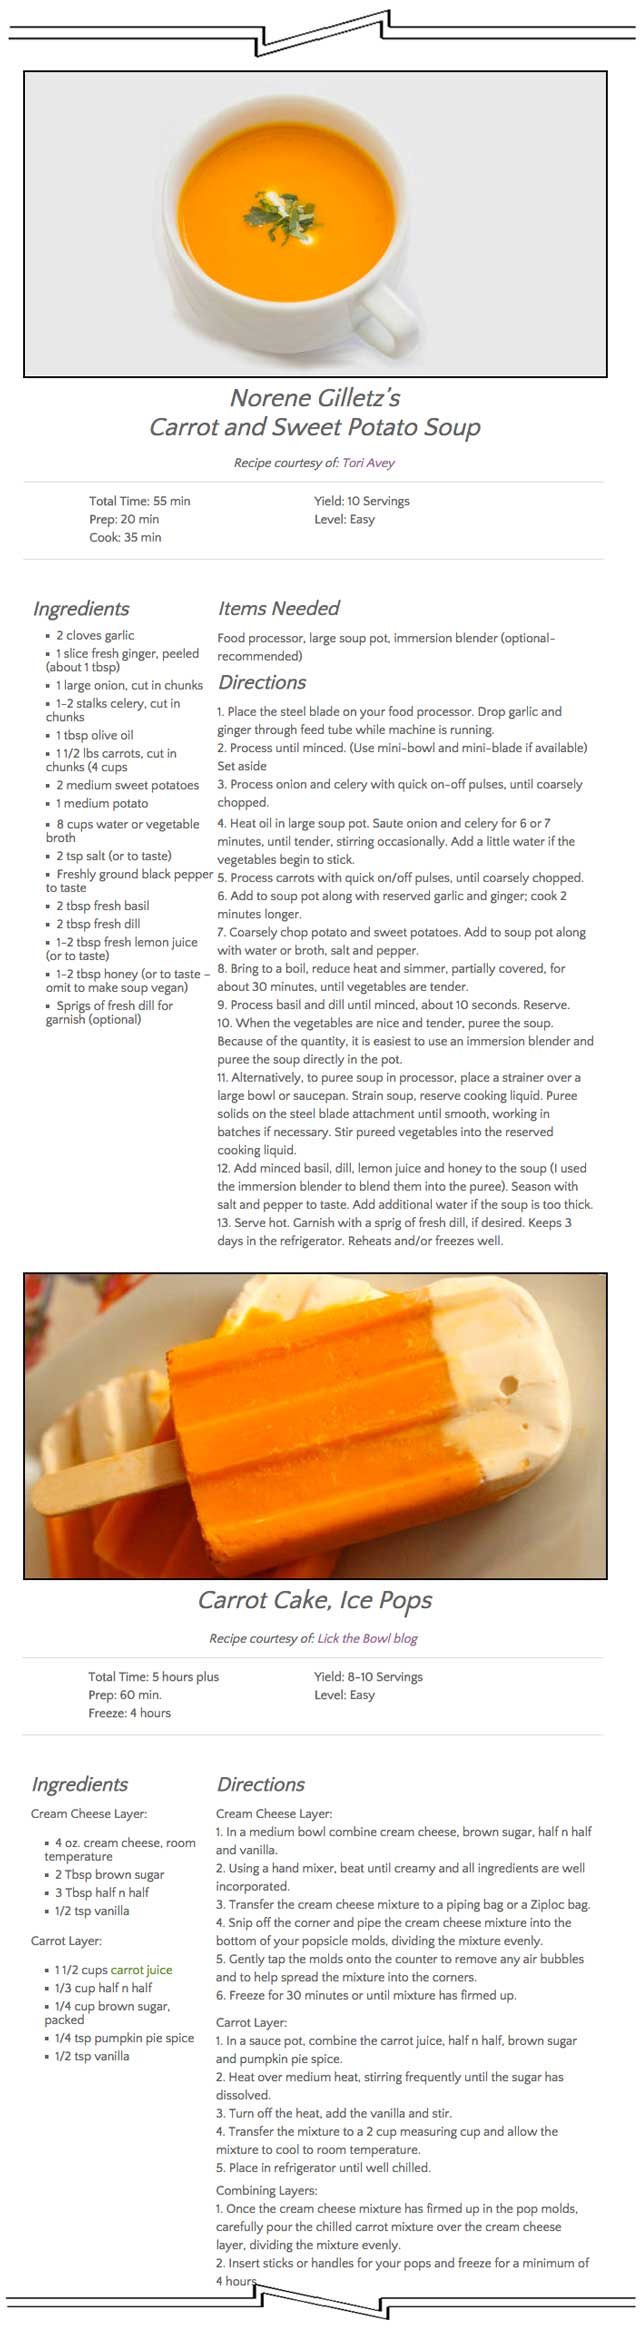 carrot recipes, One Community